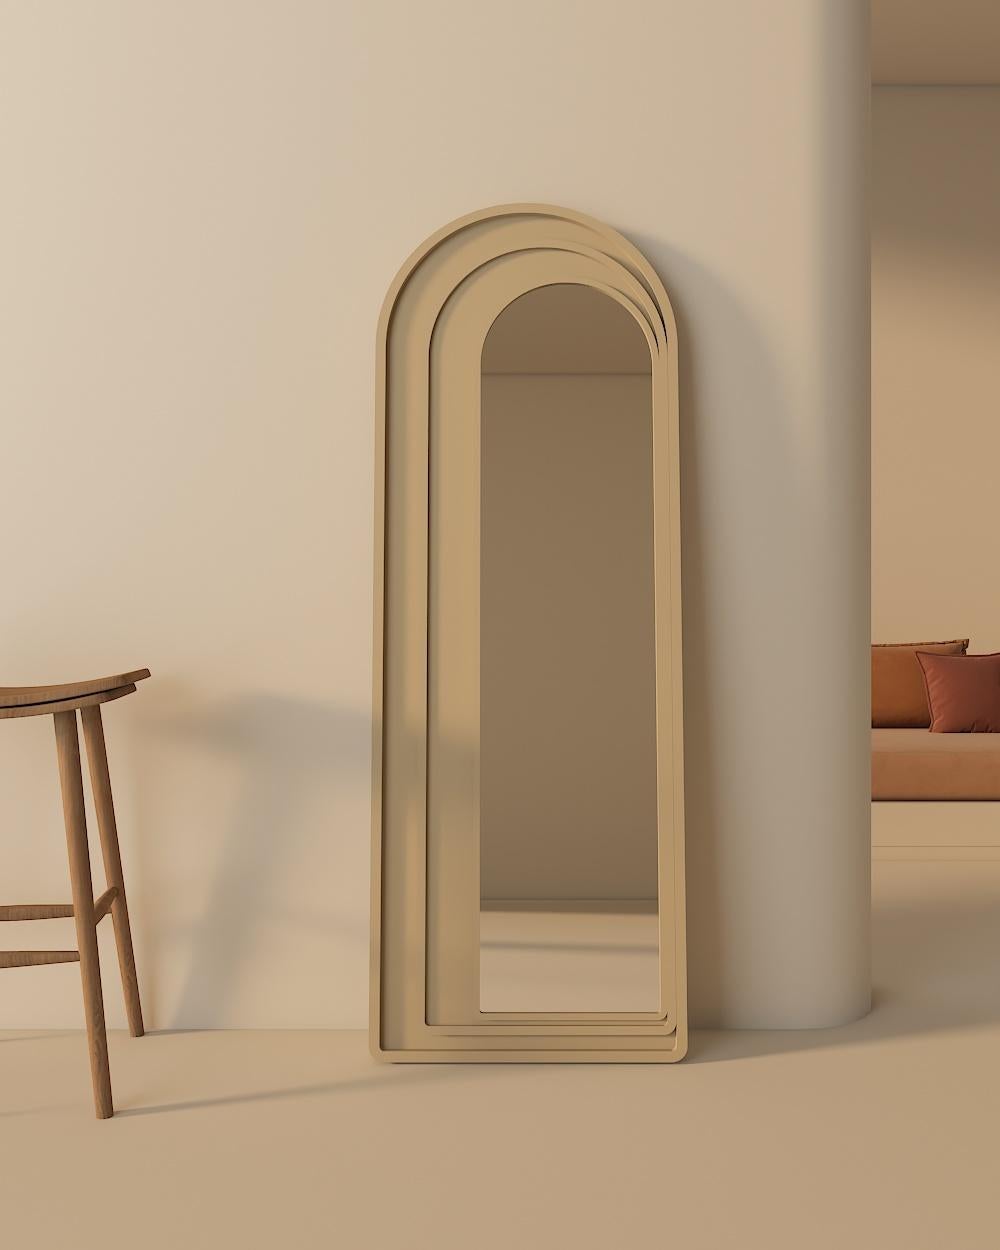 Designer: Selkan SOLMAZ ERÇEL

The Sevilla mirror is the cities collection of SEL FURNITURE's brand. 
Sevilla mirror is designed with influence from the Alcazar Palace built in Sevilla, Spain. 
A metaphor is created between internal journey of a